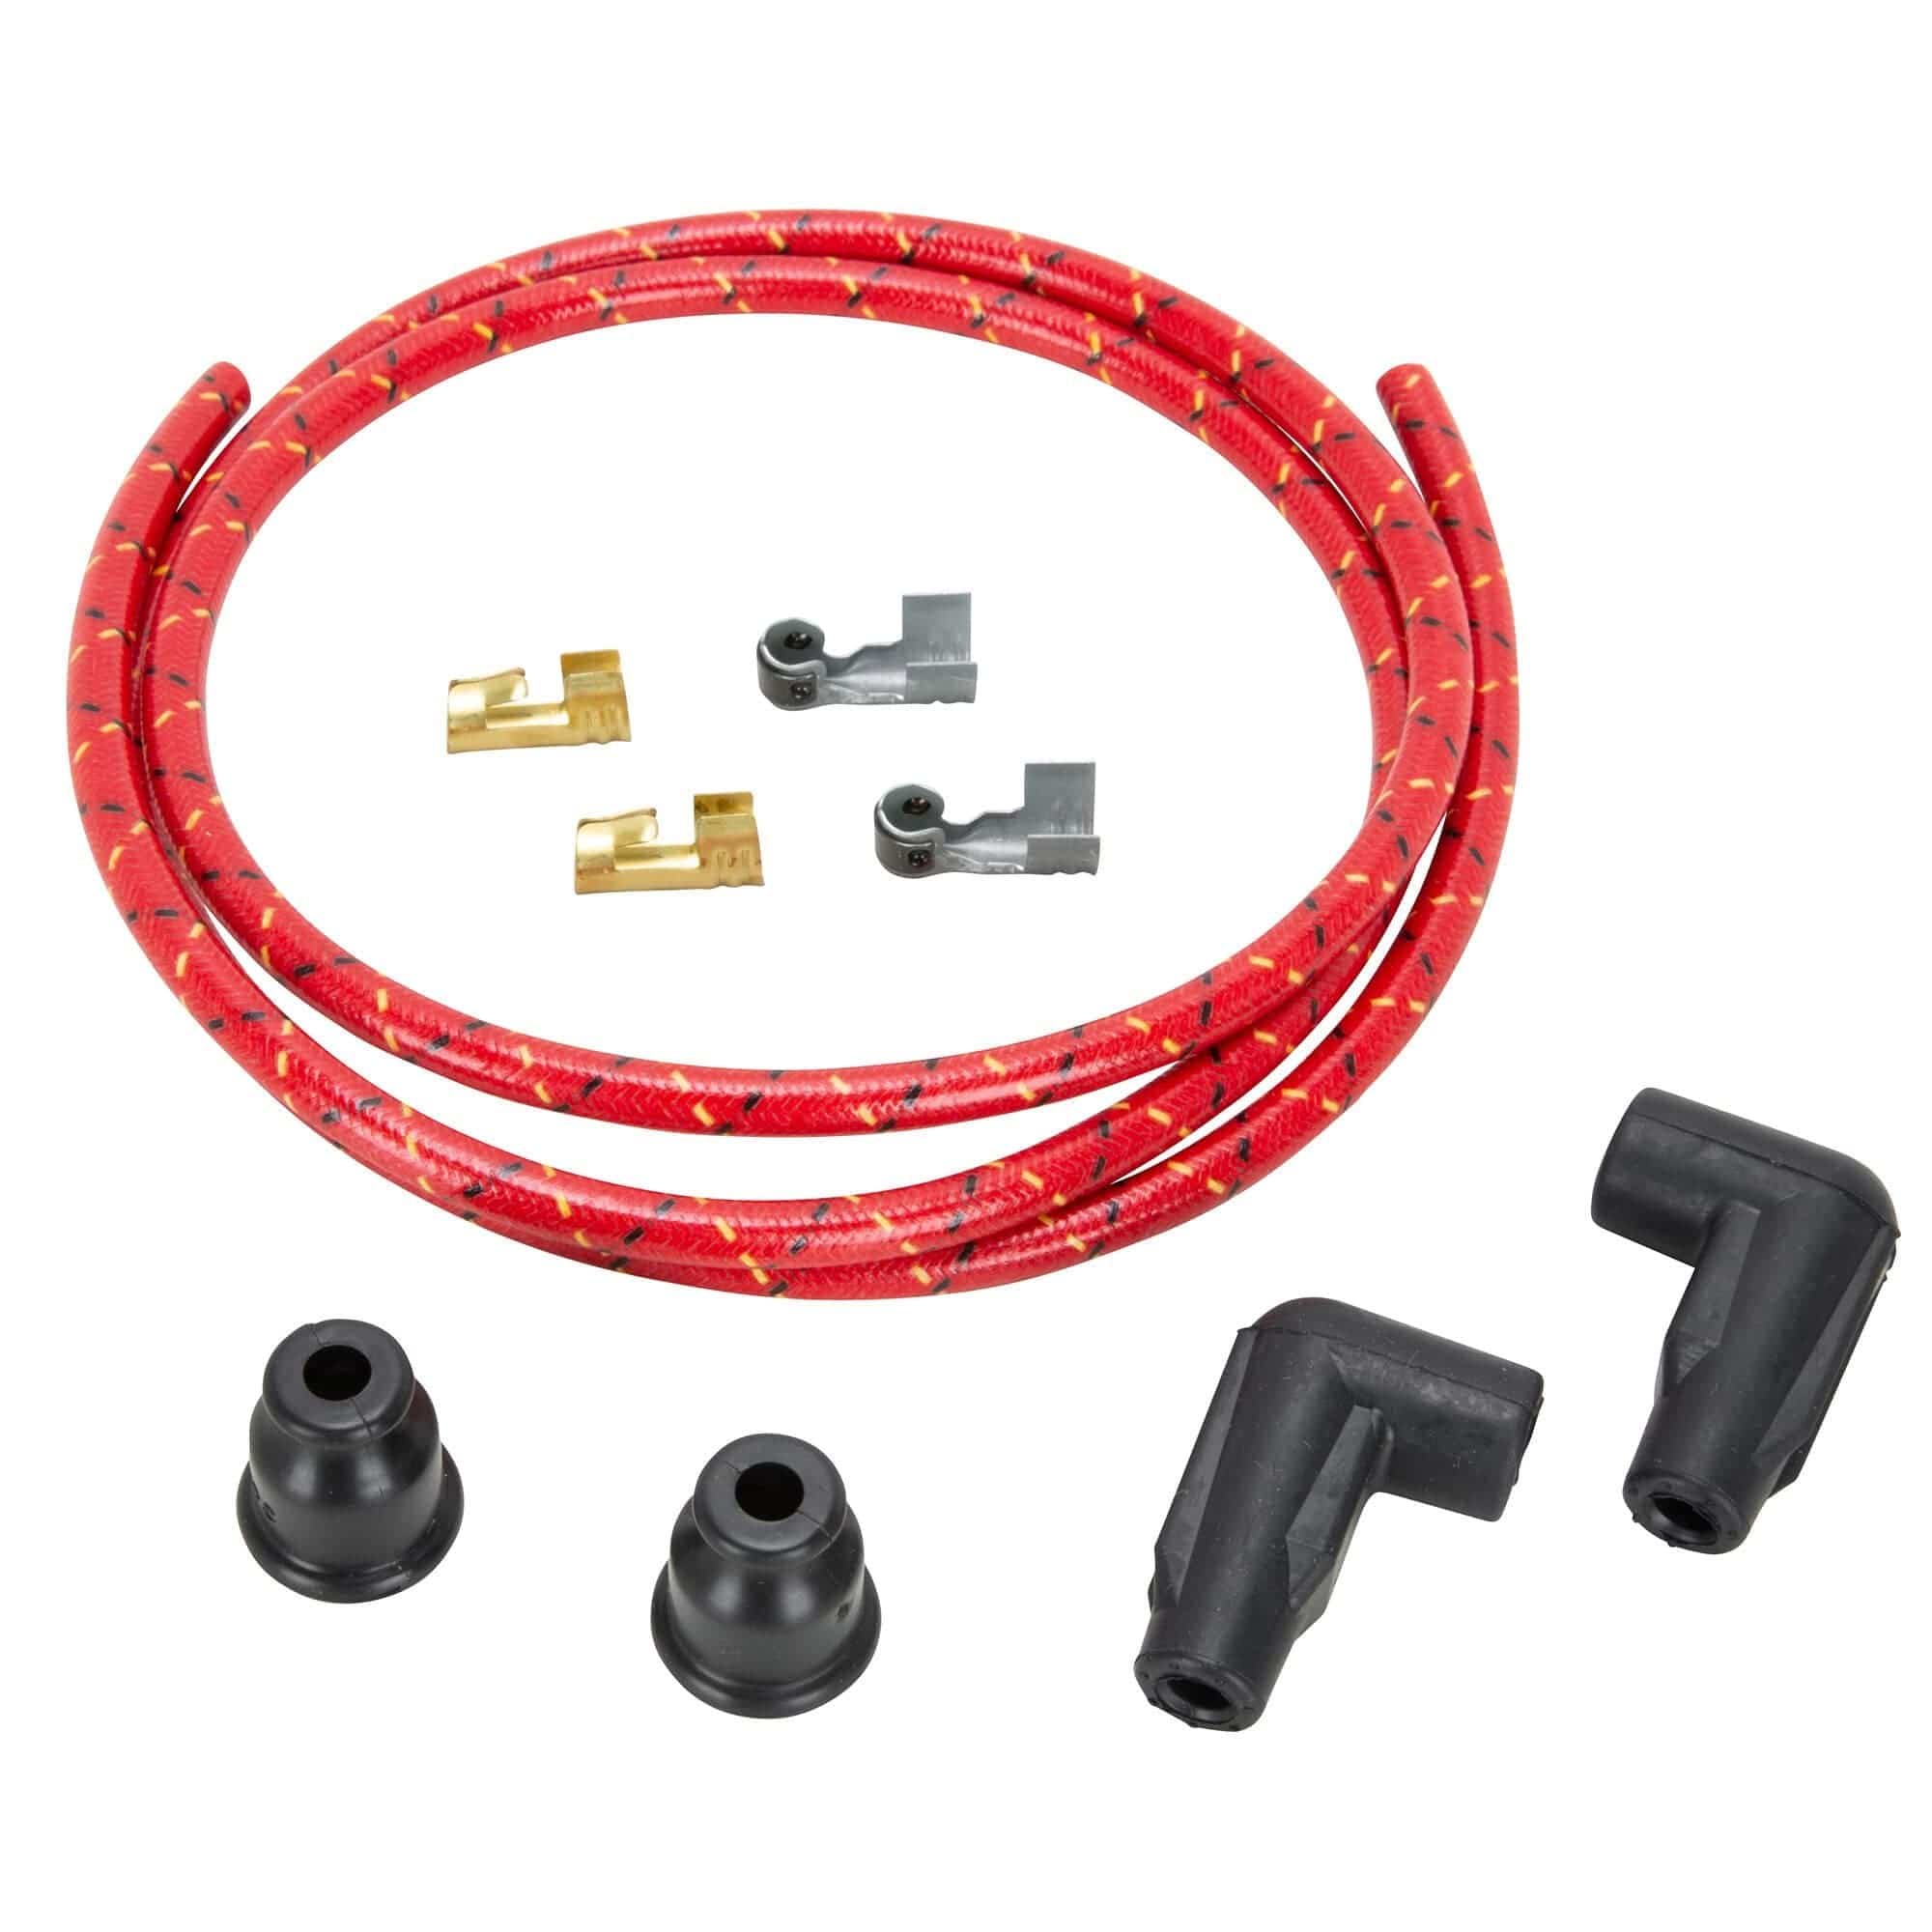 Lowbrow Customs 7mm Cloth 90 Degree Spark Plug Wire Sets - Red w/ Black and  Yellow Tracers